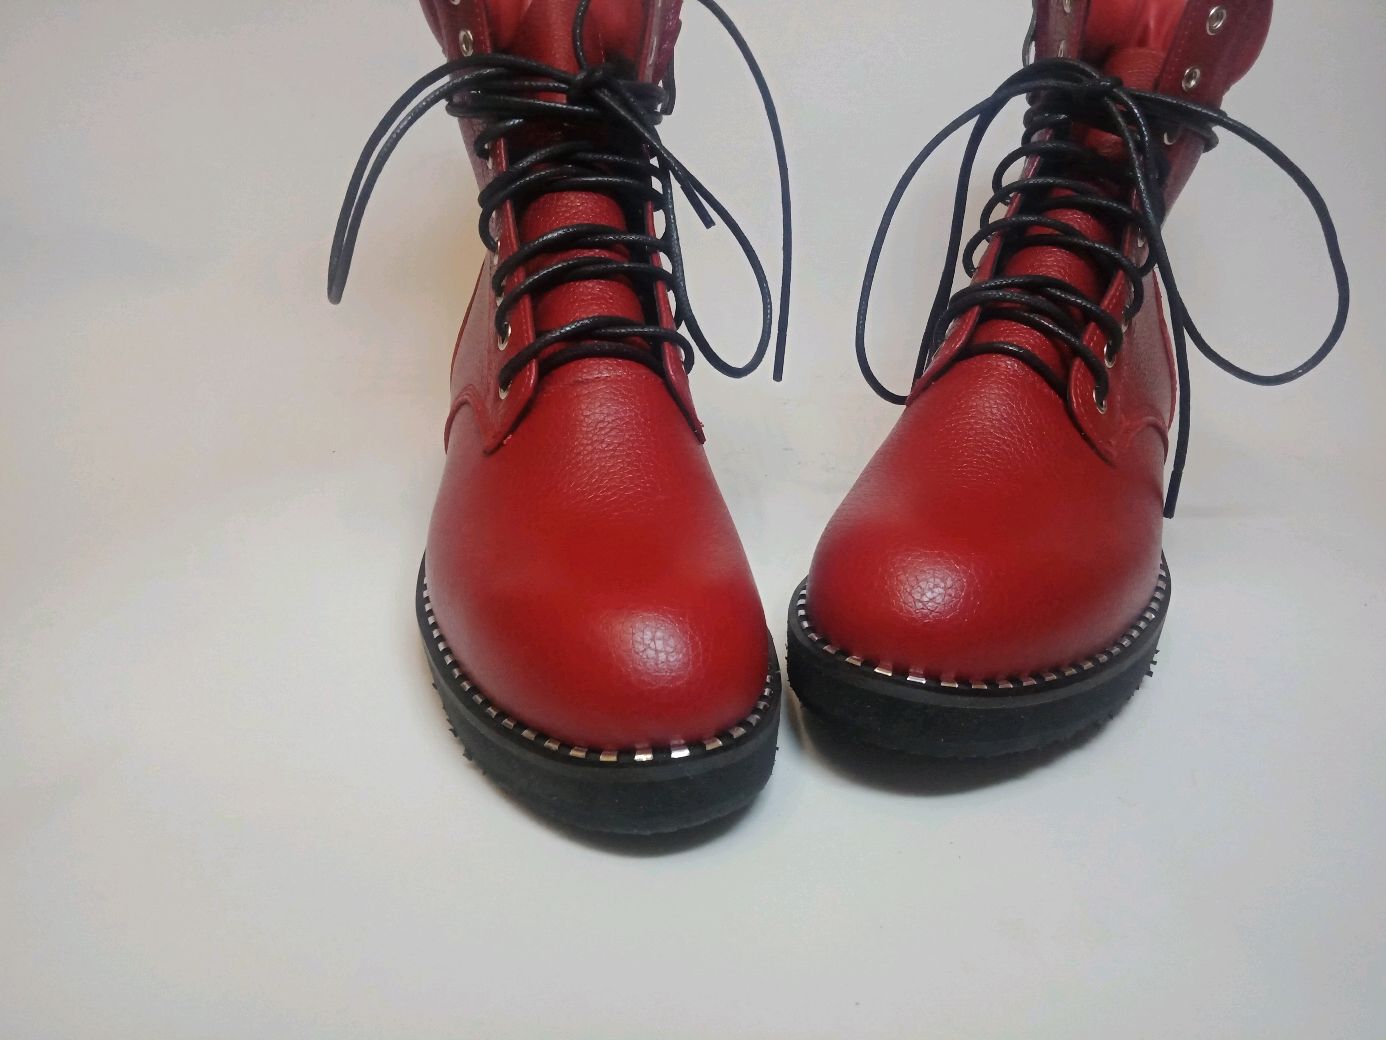 red high boots